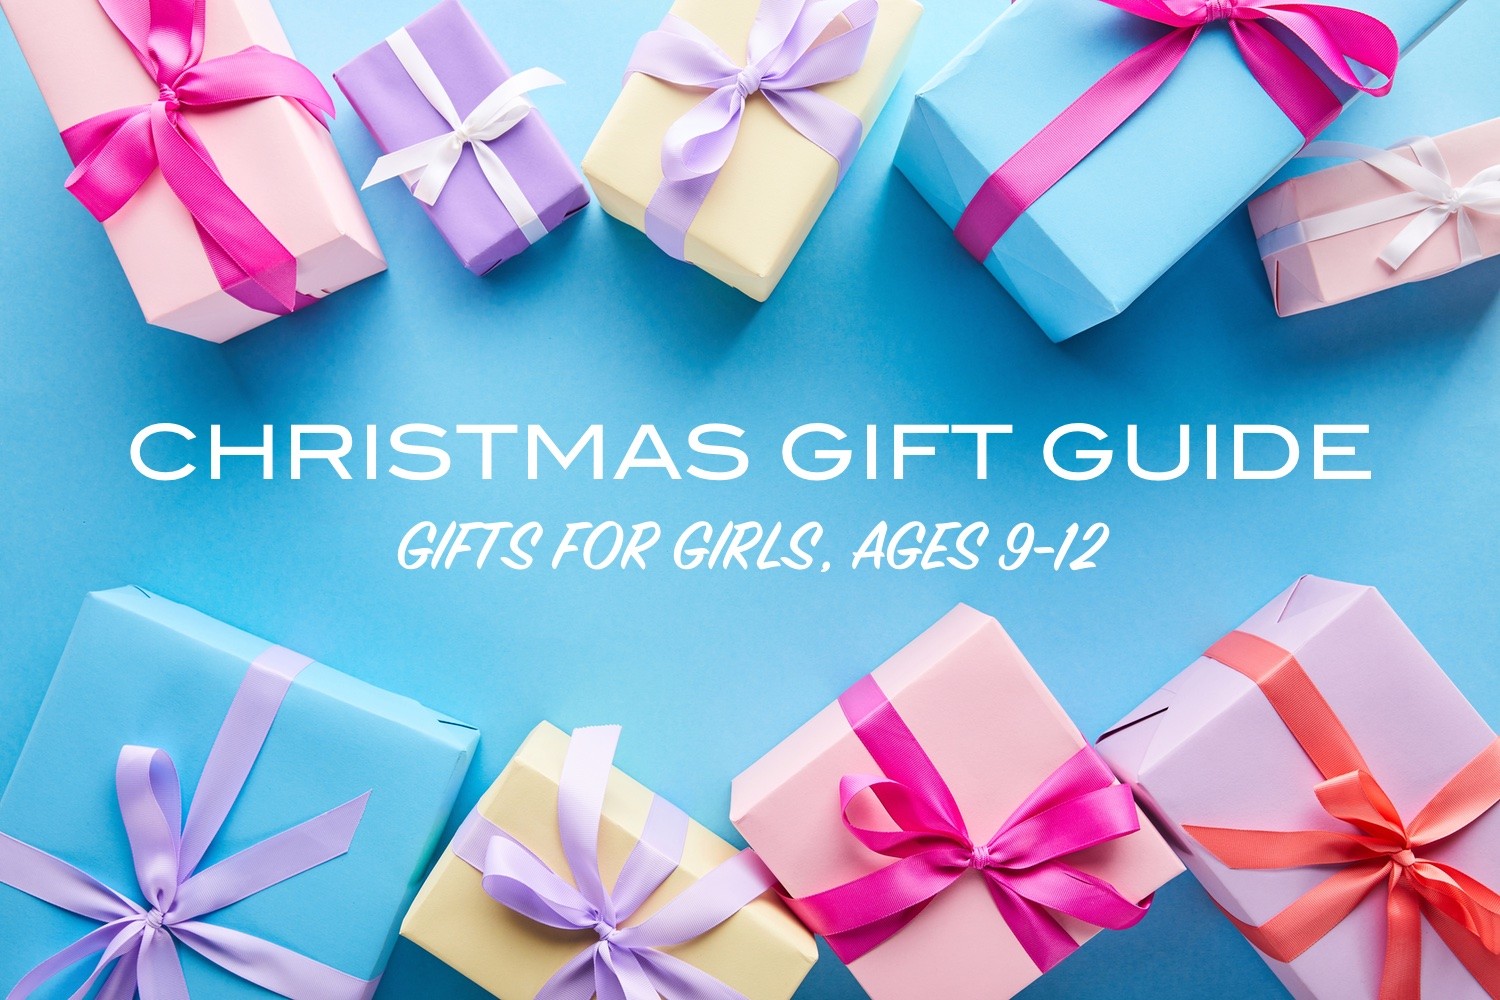 Christmas Gift Guide 2021: Gifts for Girls (ages 9-12) - Metropolitan